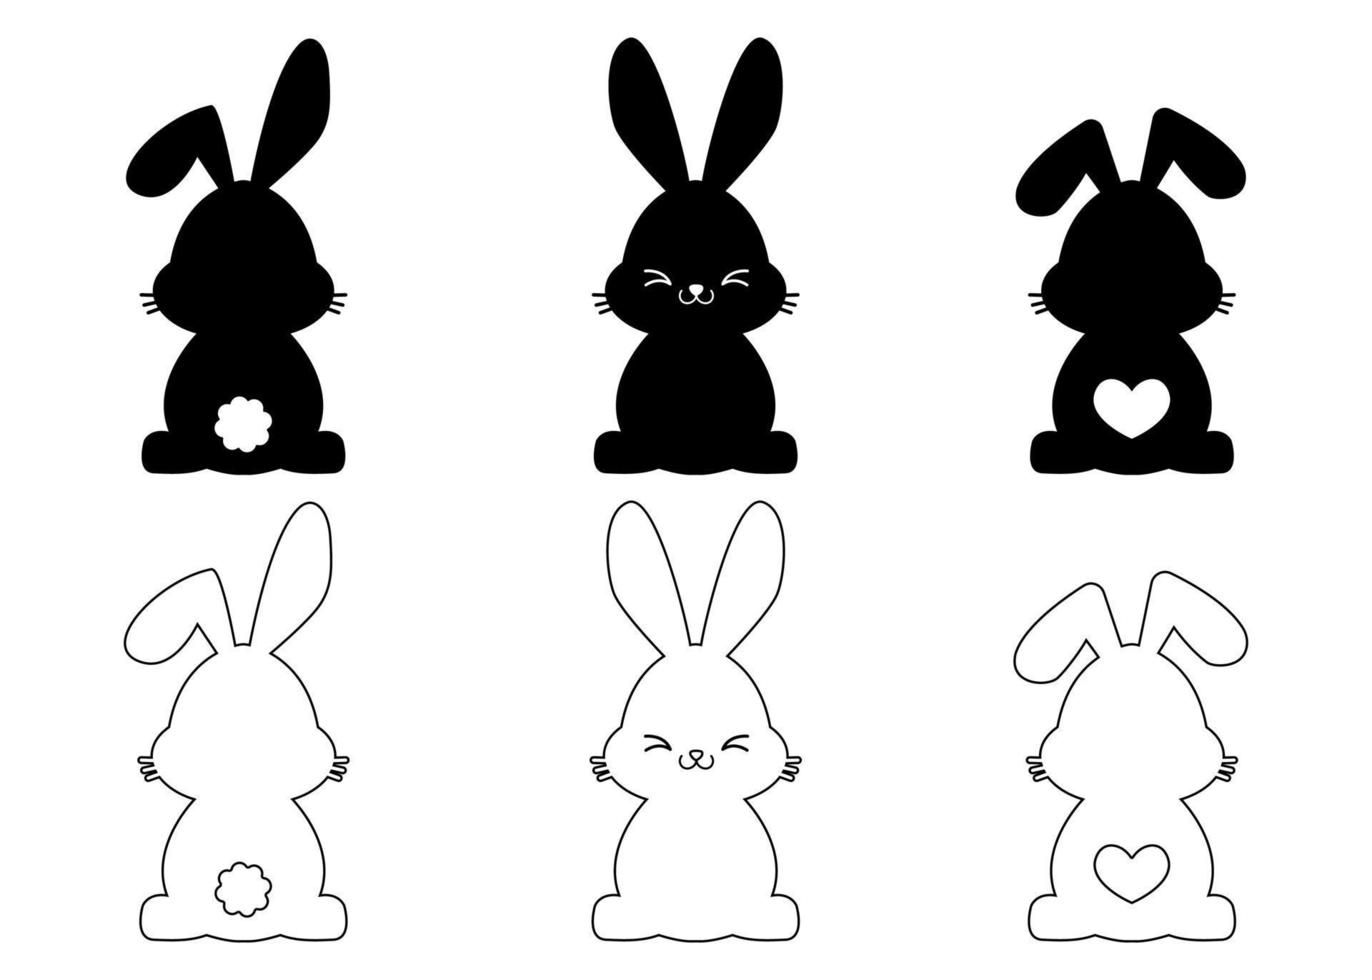 Silhouettes of bunnies isolated on a white background. Set of different rabbits hand drawn style vector